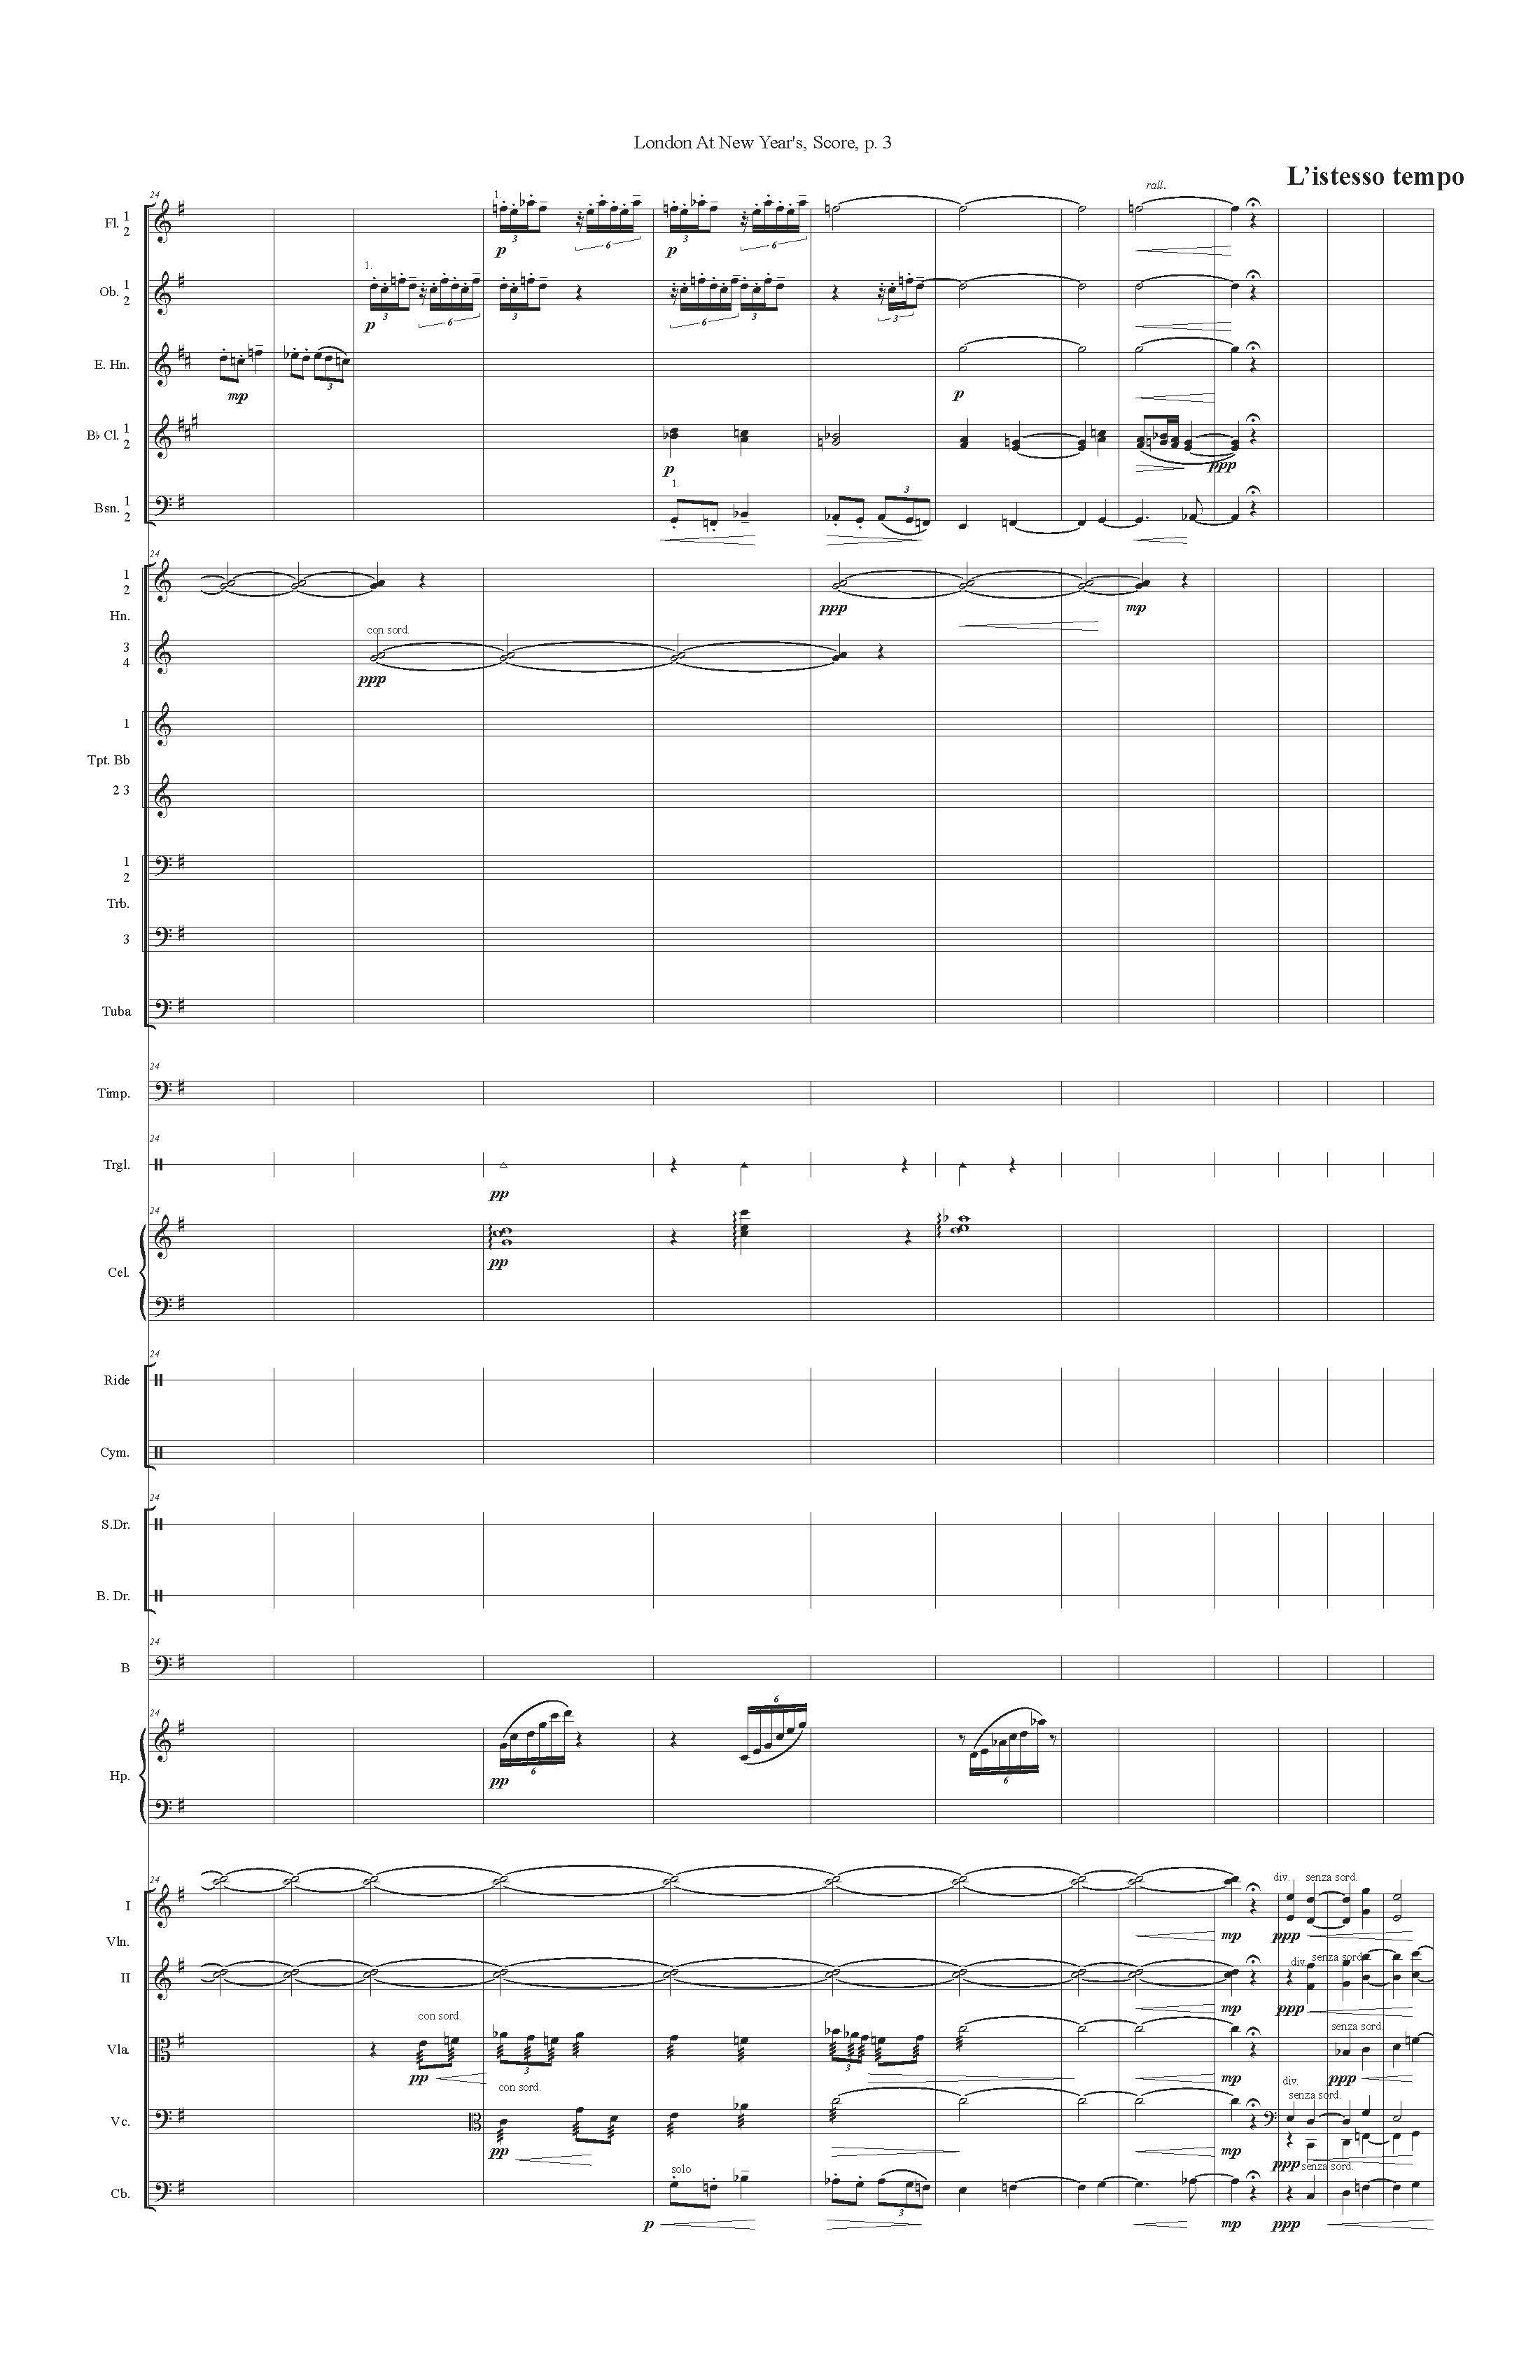 LONDON AT NEW YEARS ORCH - Score_Page_03.jpg